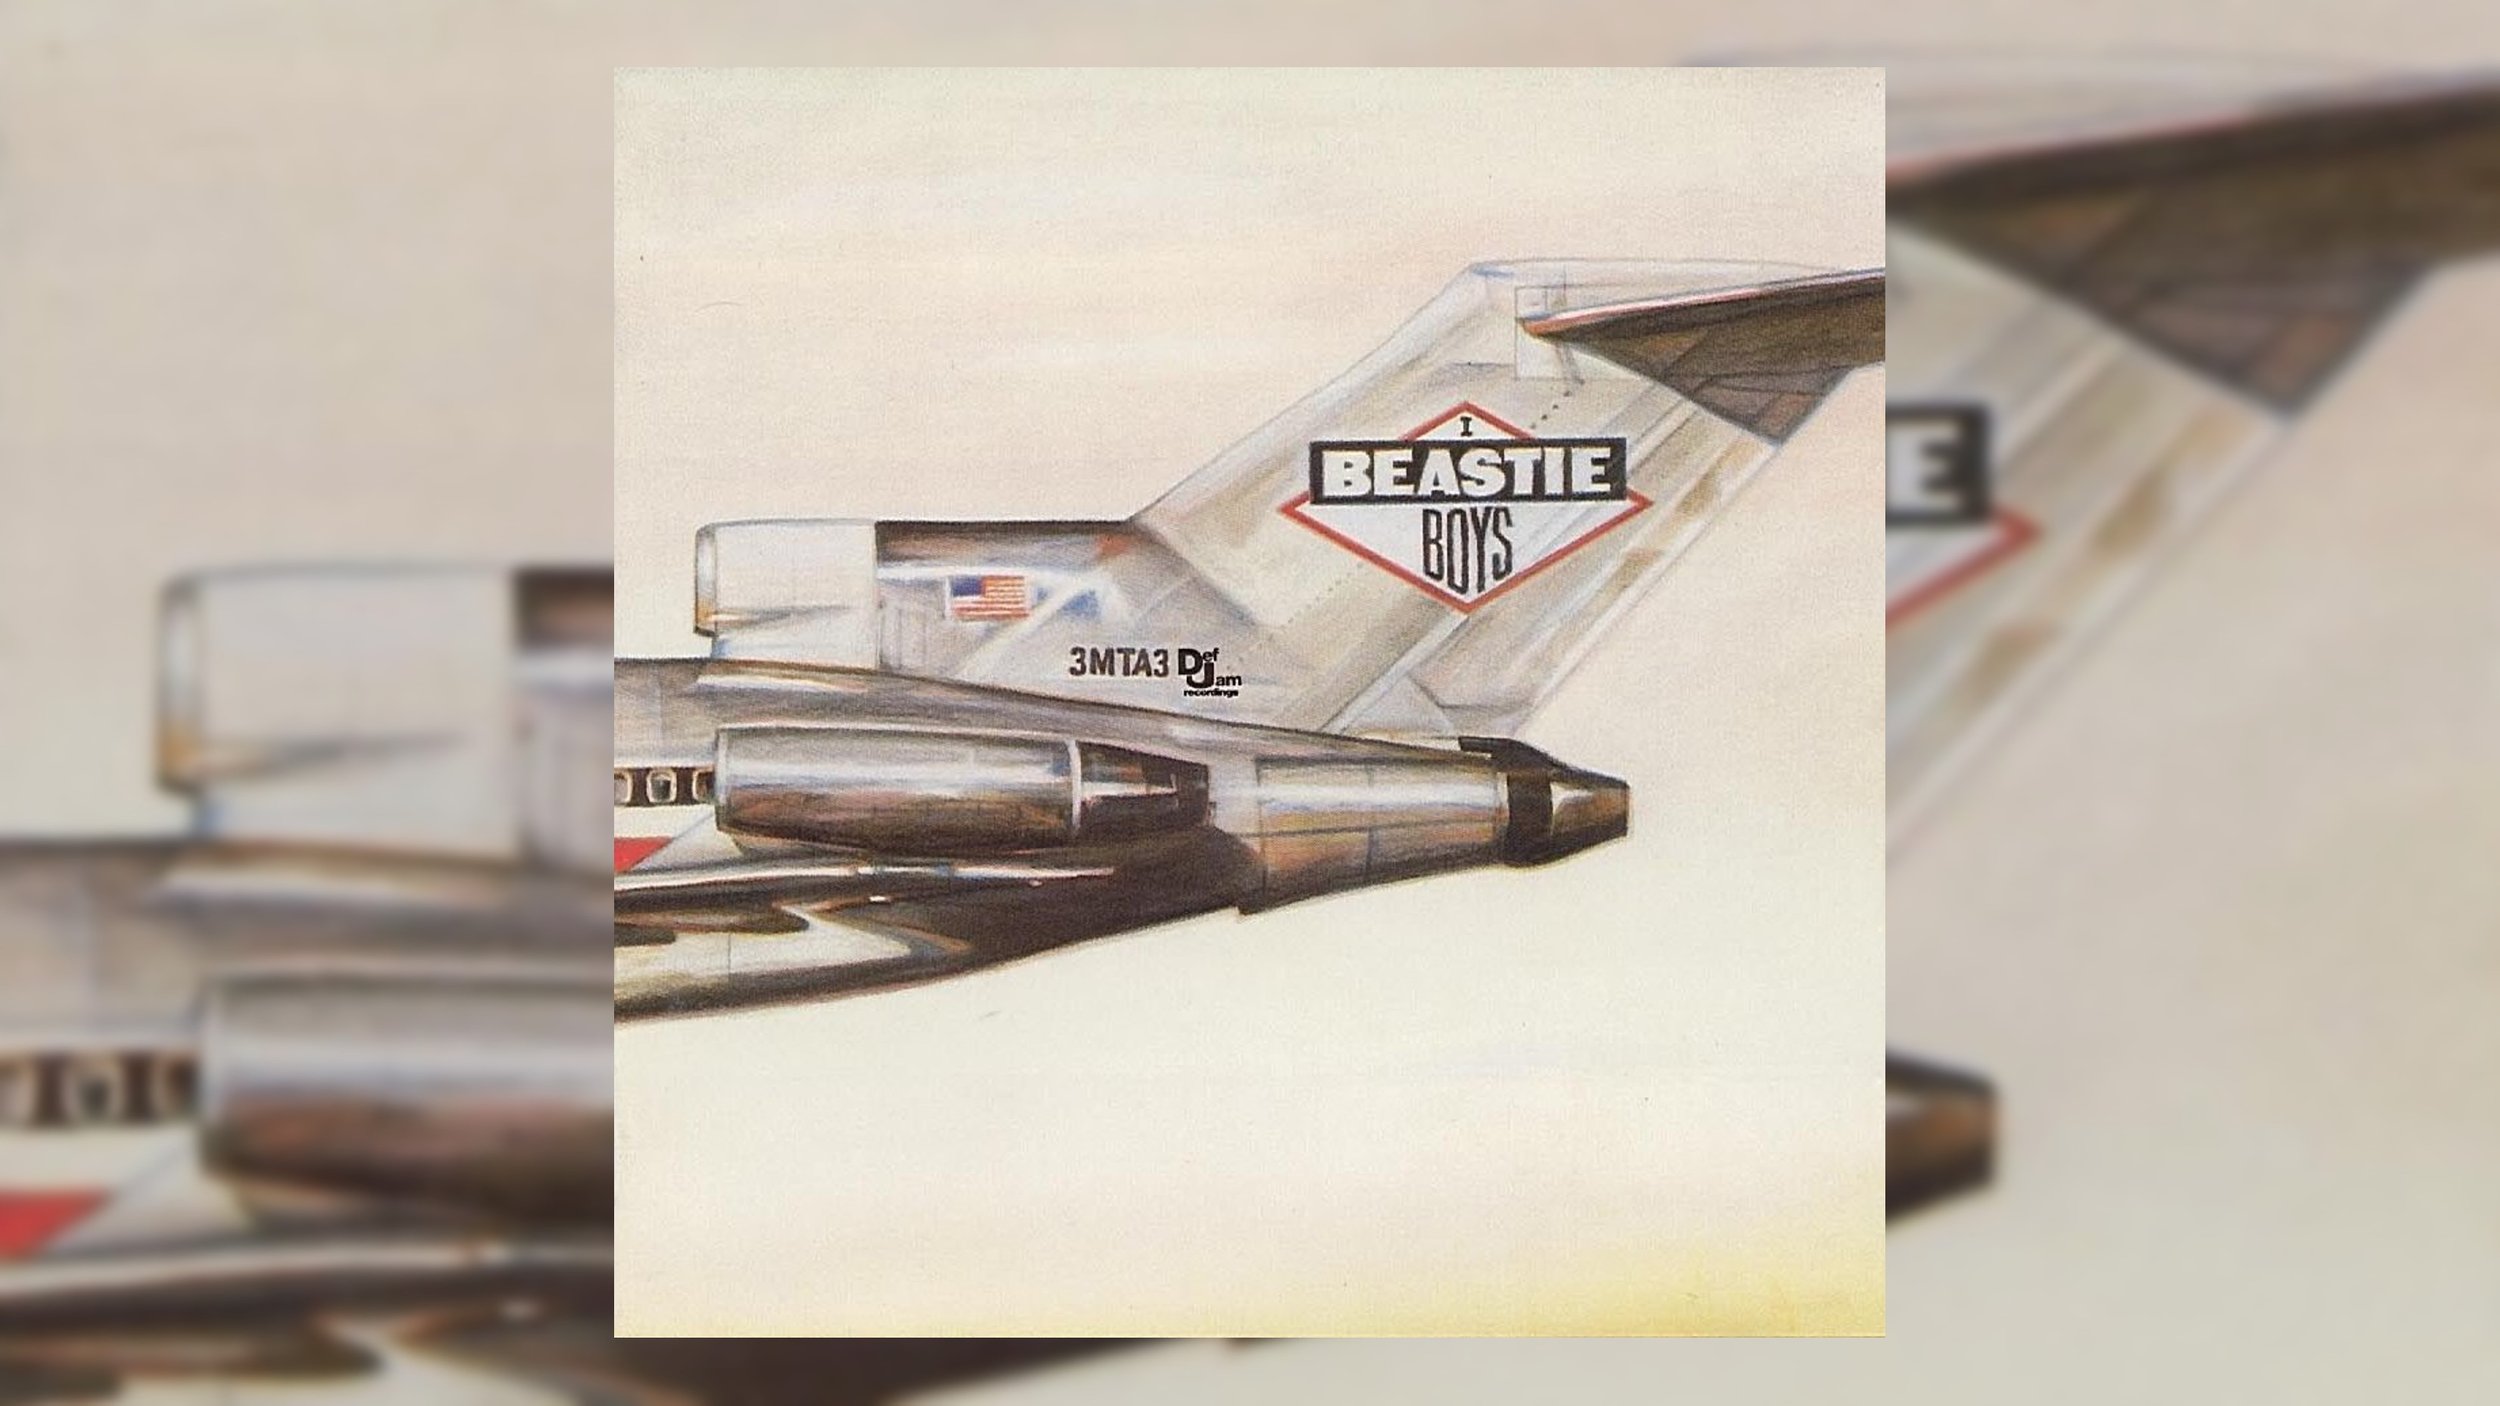 Revisit & Listen to the Beastie Boys' Debut Album 'Licensed To Ill 